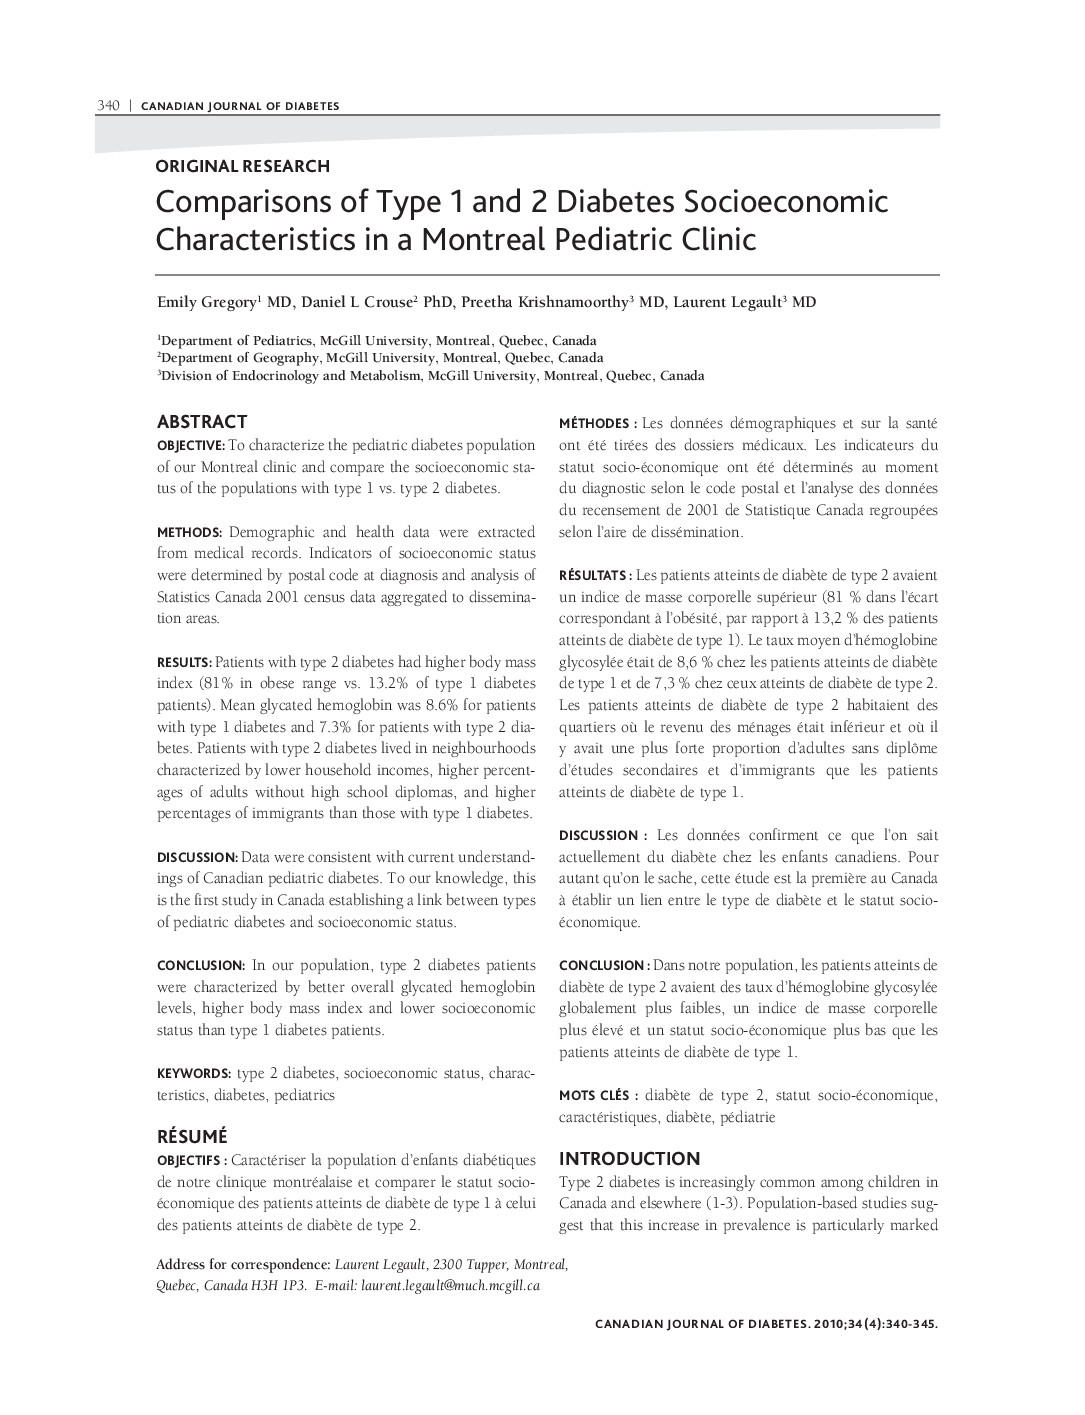 Comparisons of Type 1 and 2 Diabetes Socioeconomic Characteristics in a Montreal Pediatric Clinic